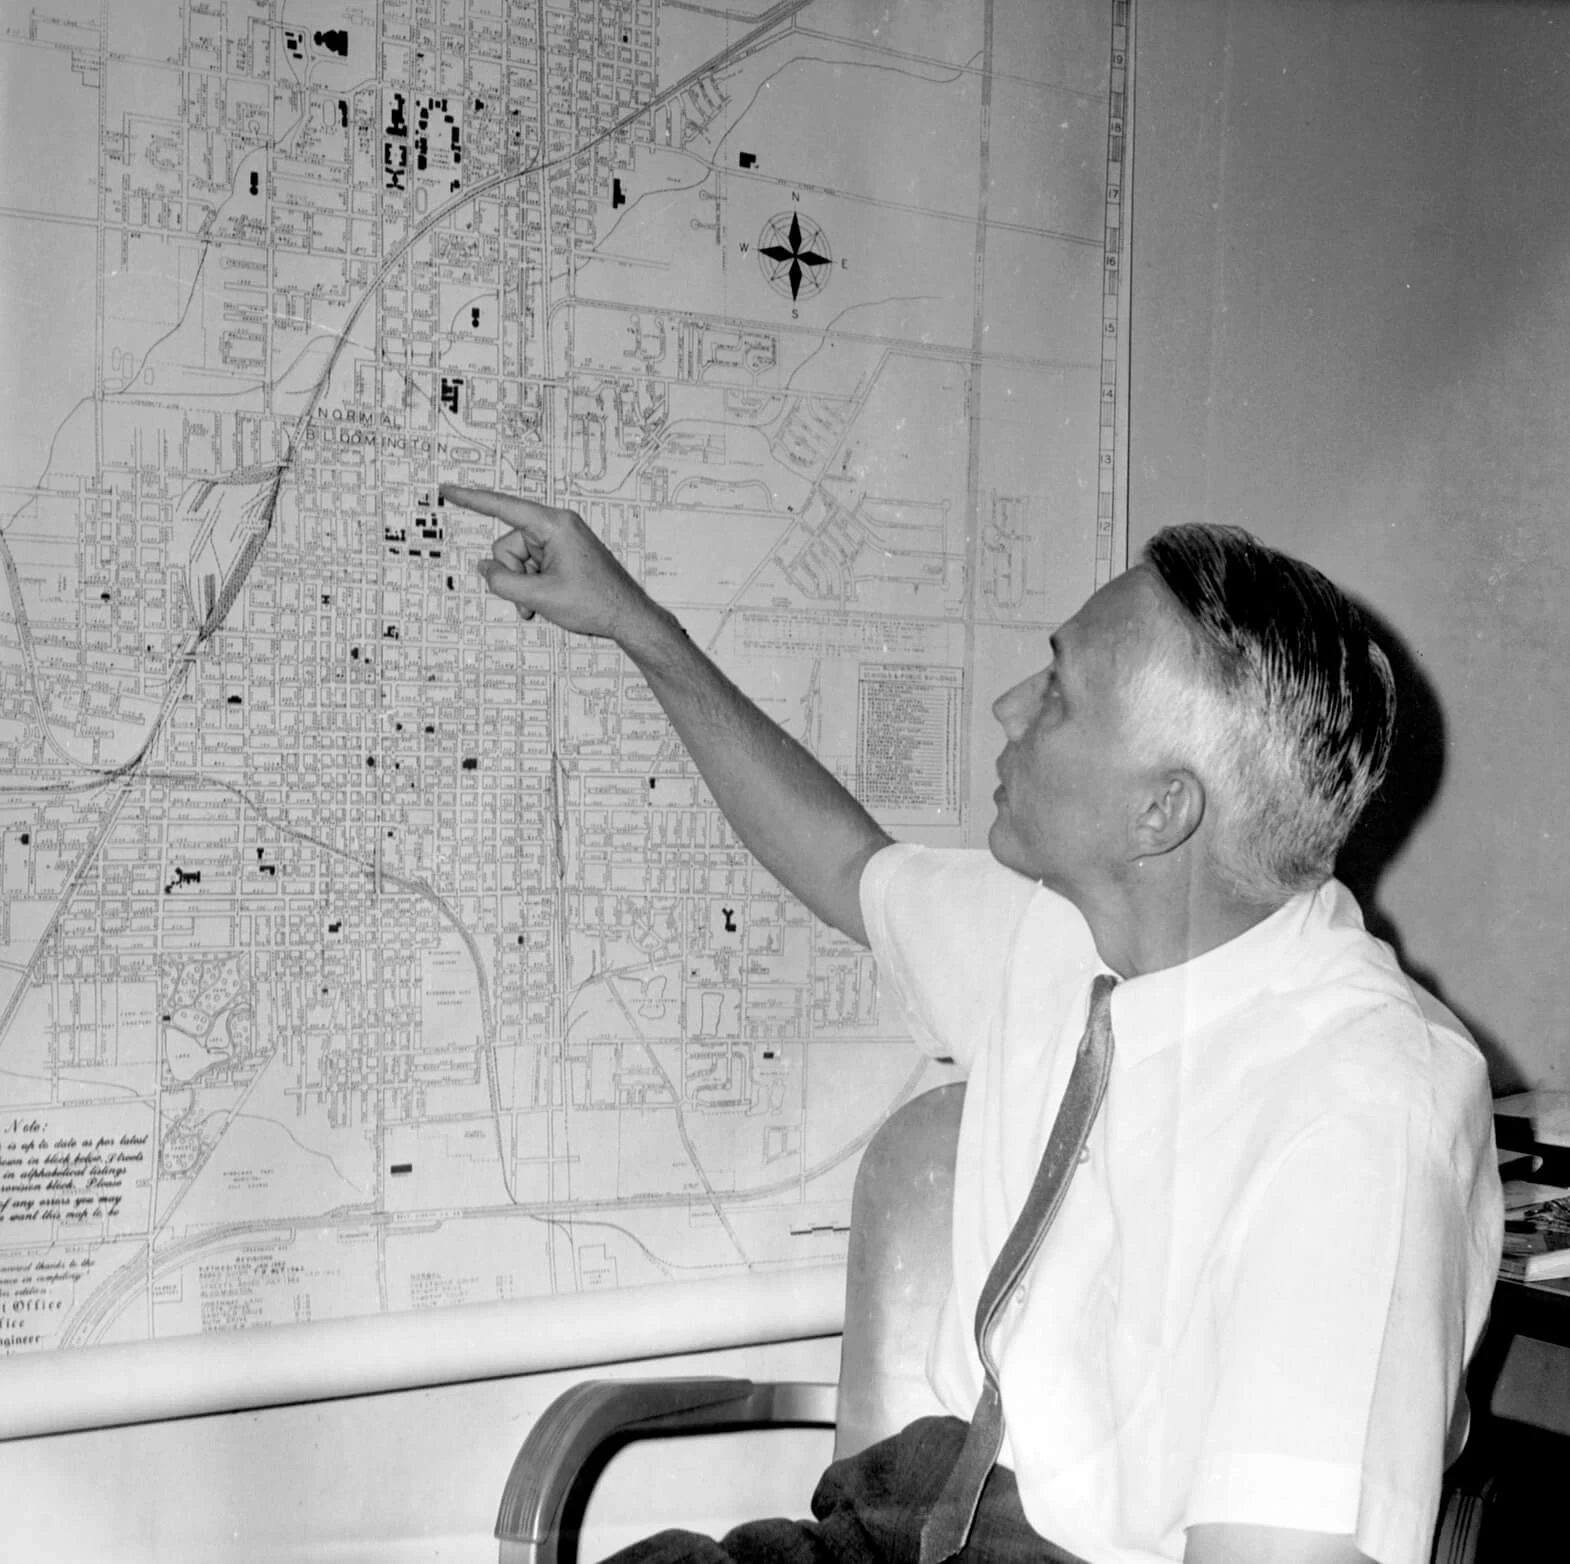 A white man wearing a short sleeved white shirt and tie points to a big map on a wall, showing welcoming neighborhoods on a map of Bloomington-Normal.